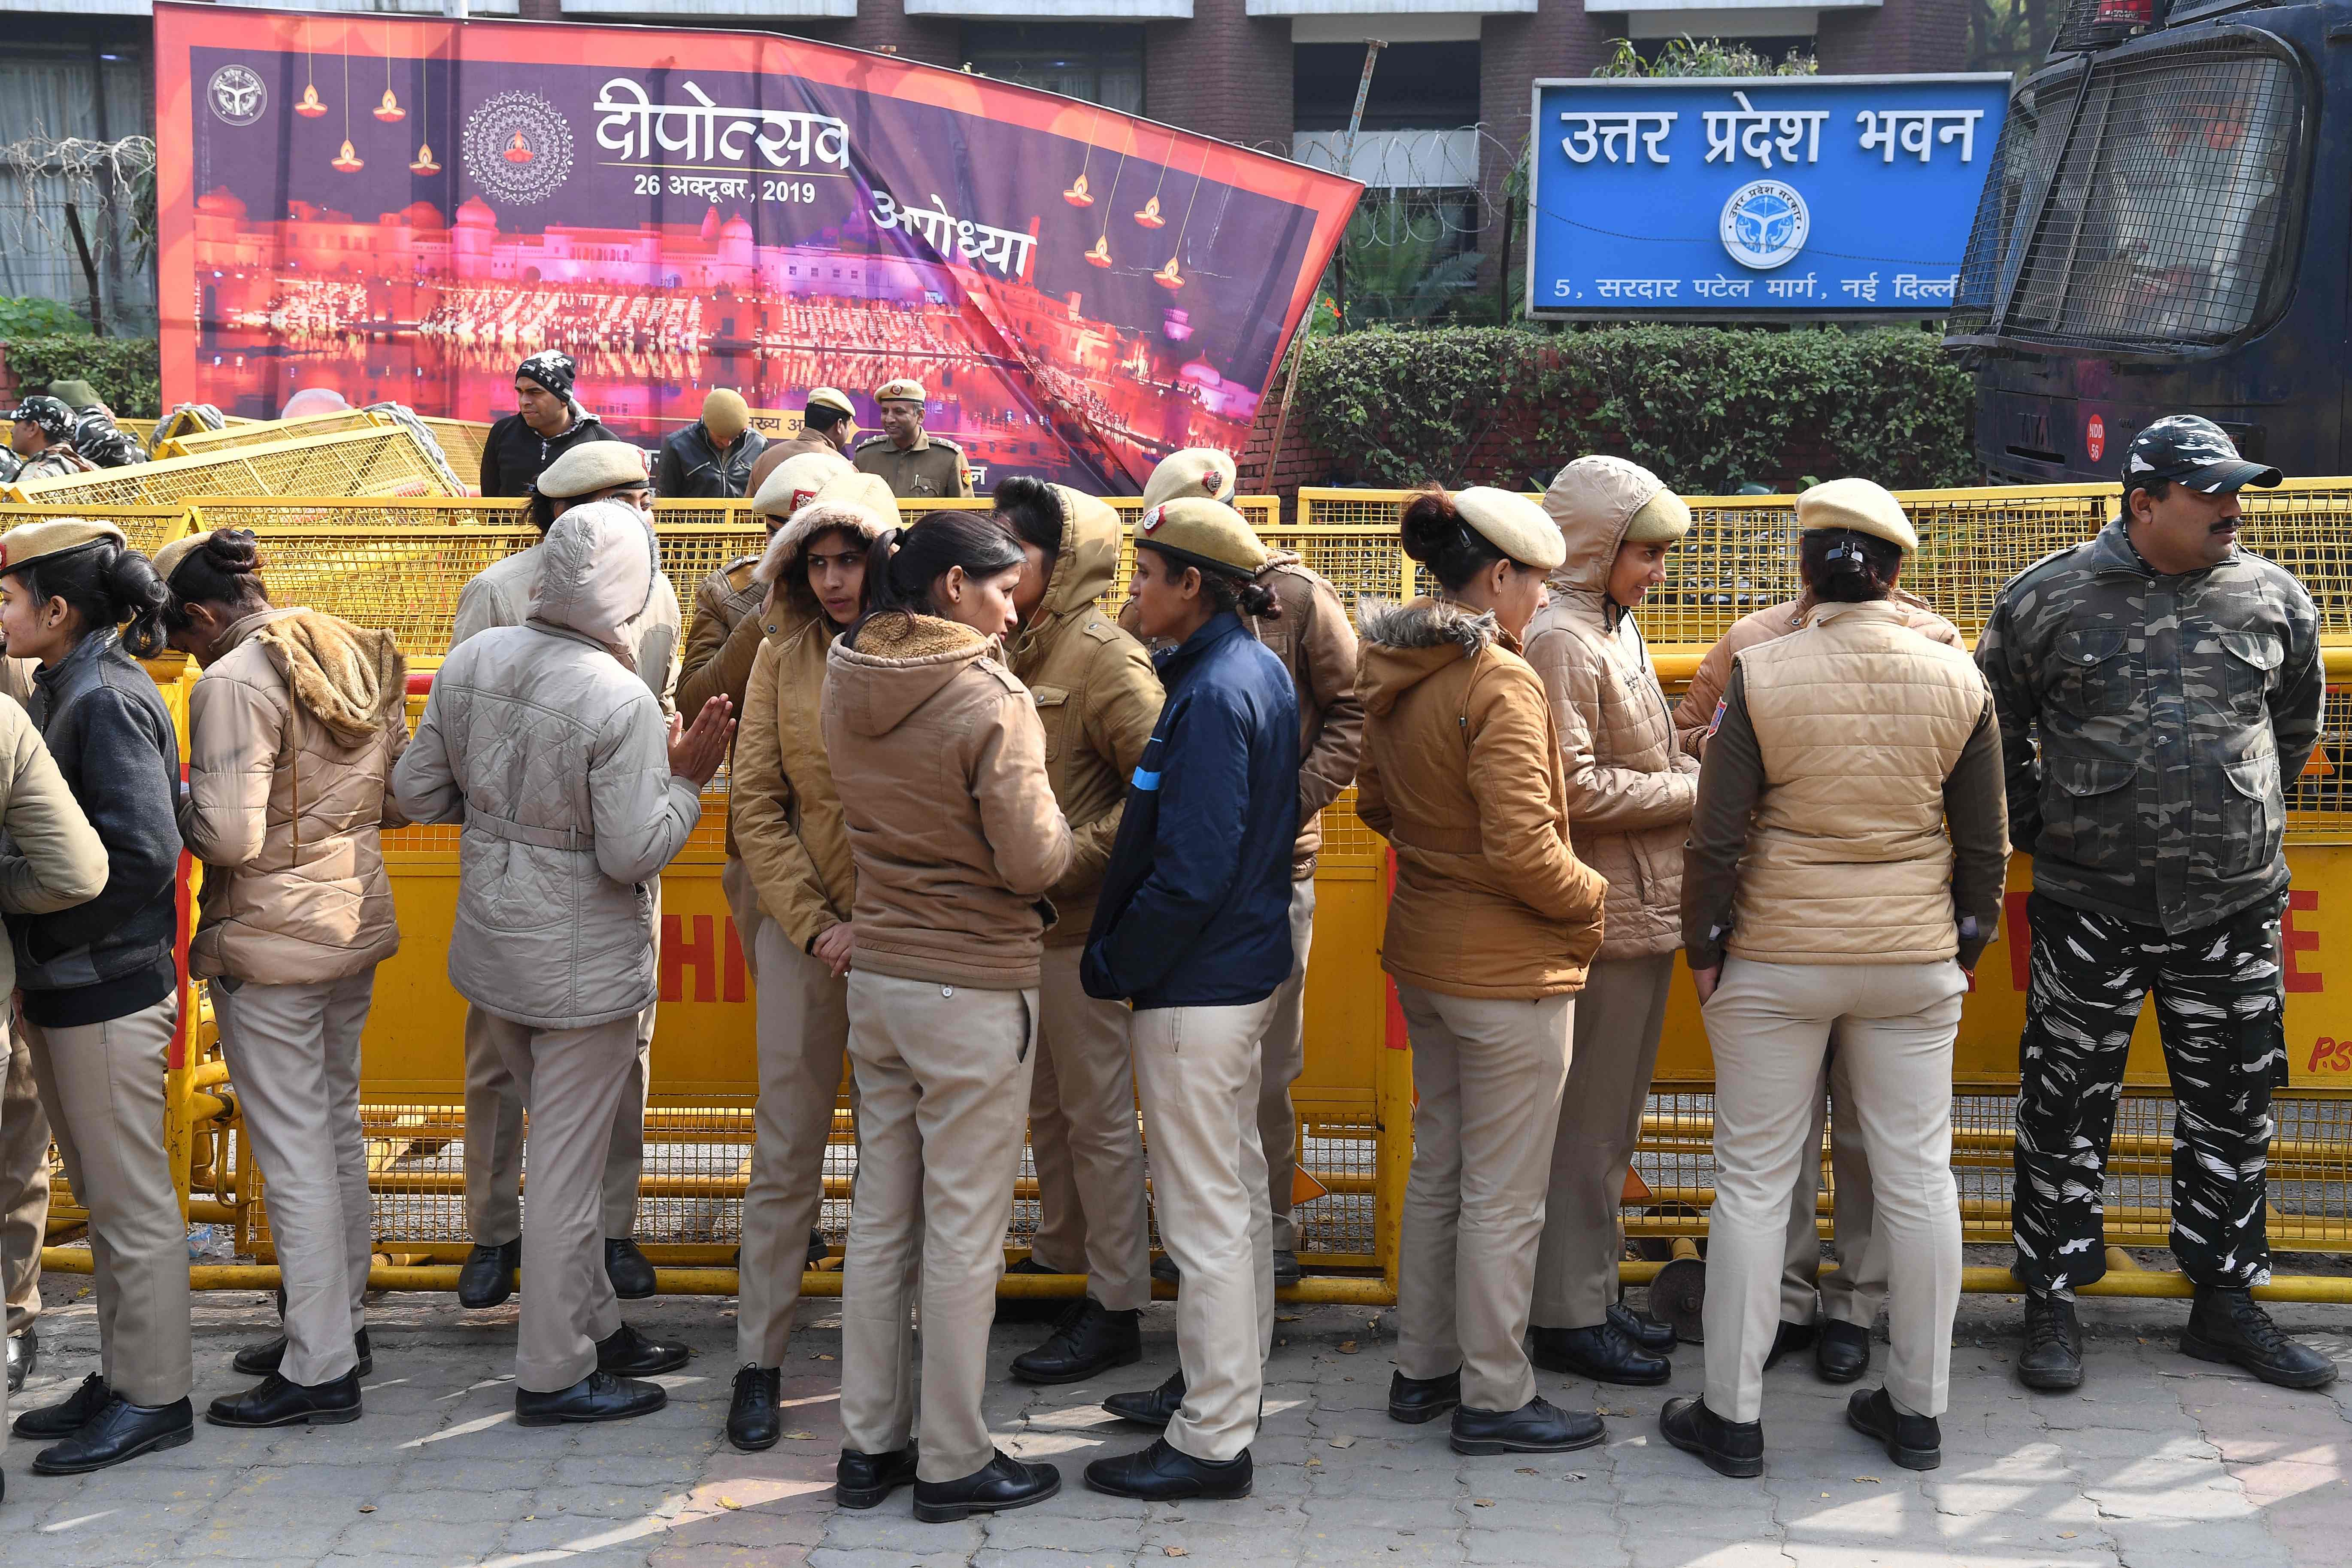 Delhi policewomen gather outside the Uttar Pradesh Bhawan (state house) before a demonstration against the crackdown on protesters in Uttar Pradesh state, over India's new citizenship law. (AFP Photo)